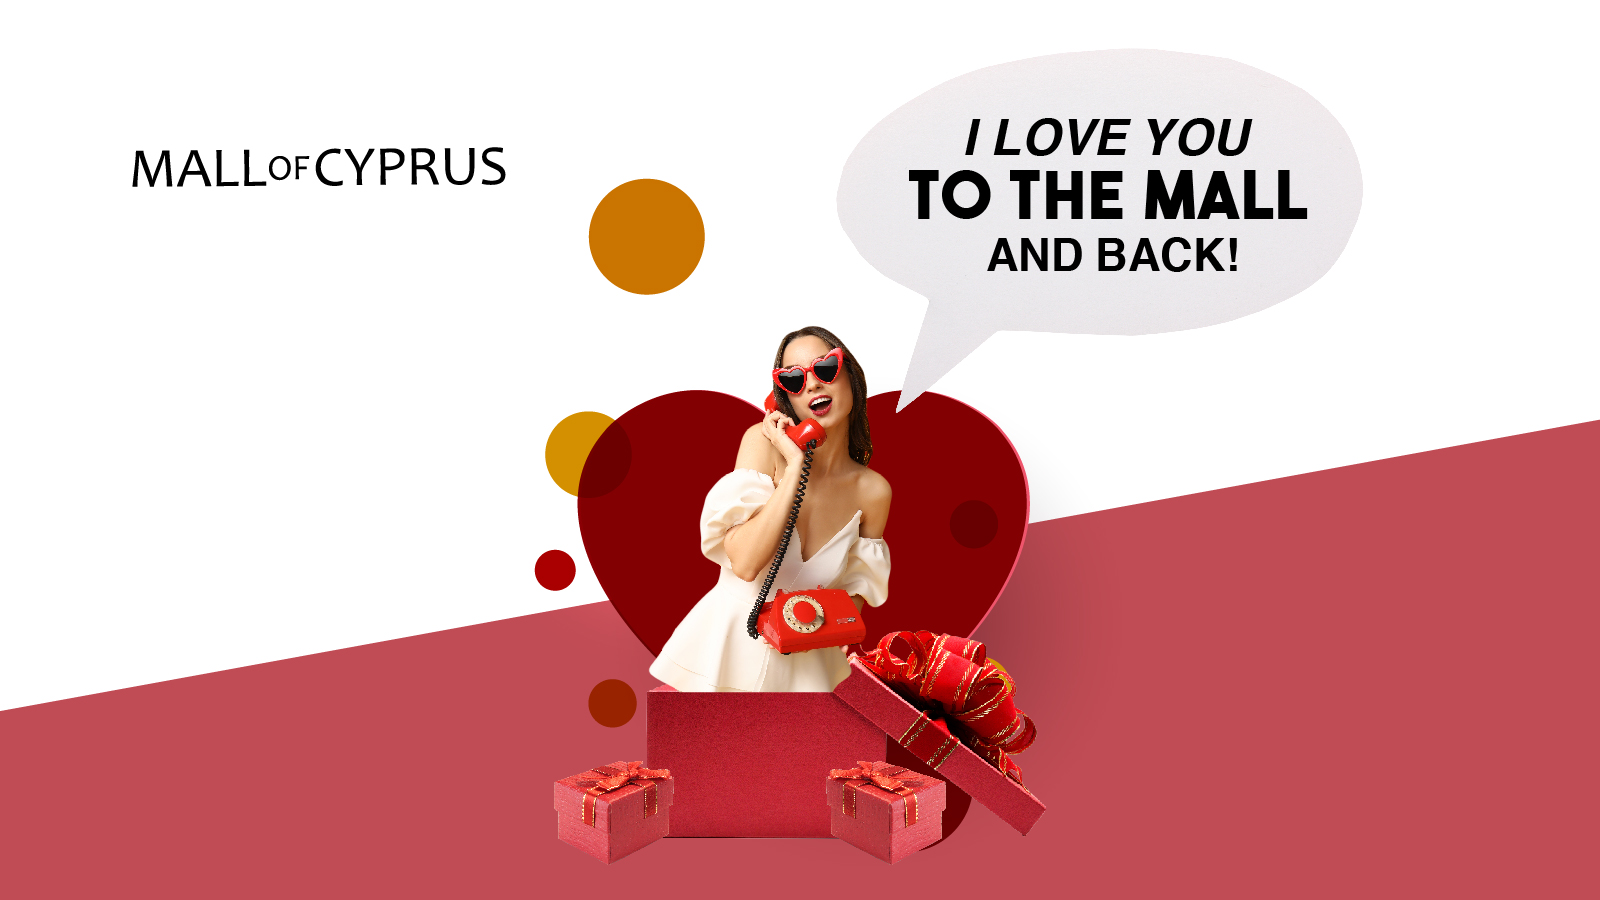 Love in Every Gift: Valentine’s Day Treasures at Mall of Cyprus!